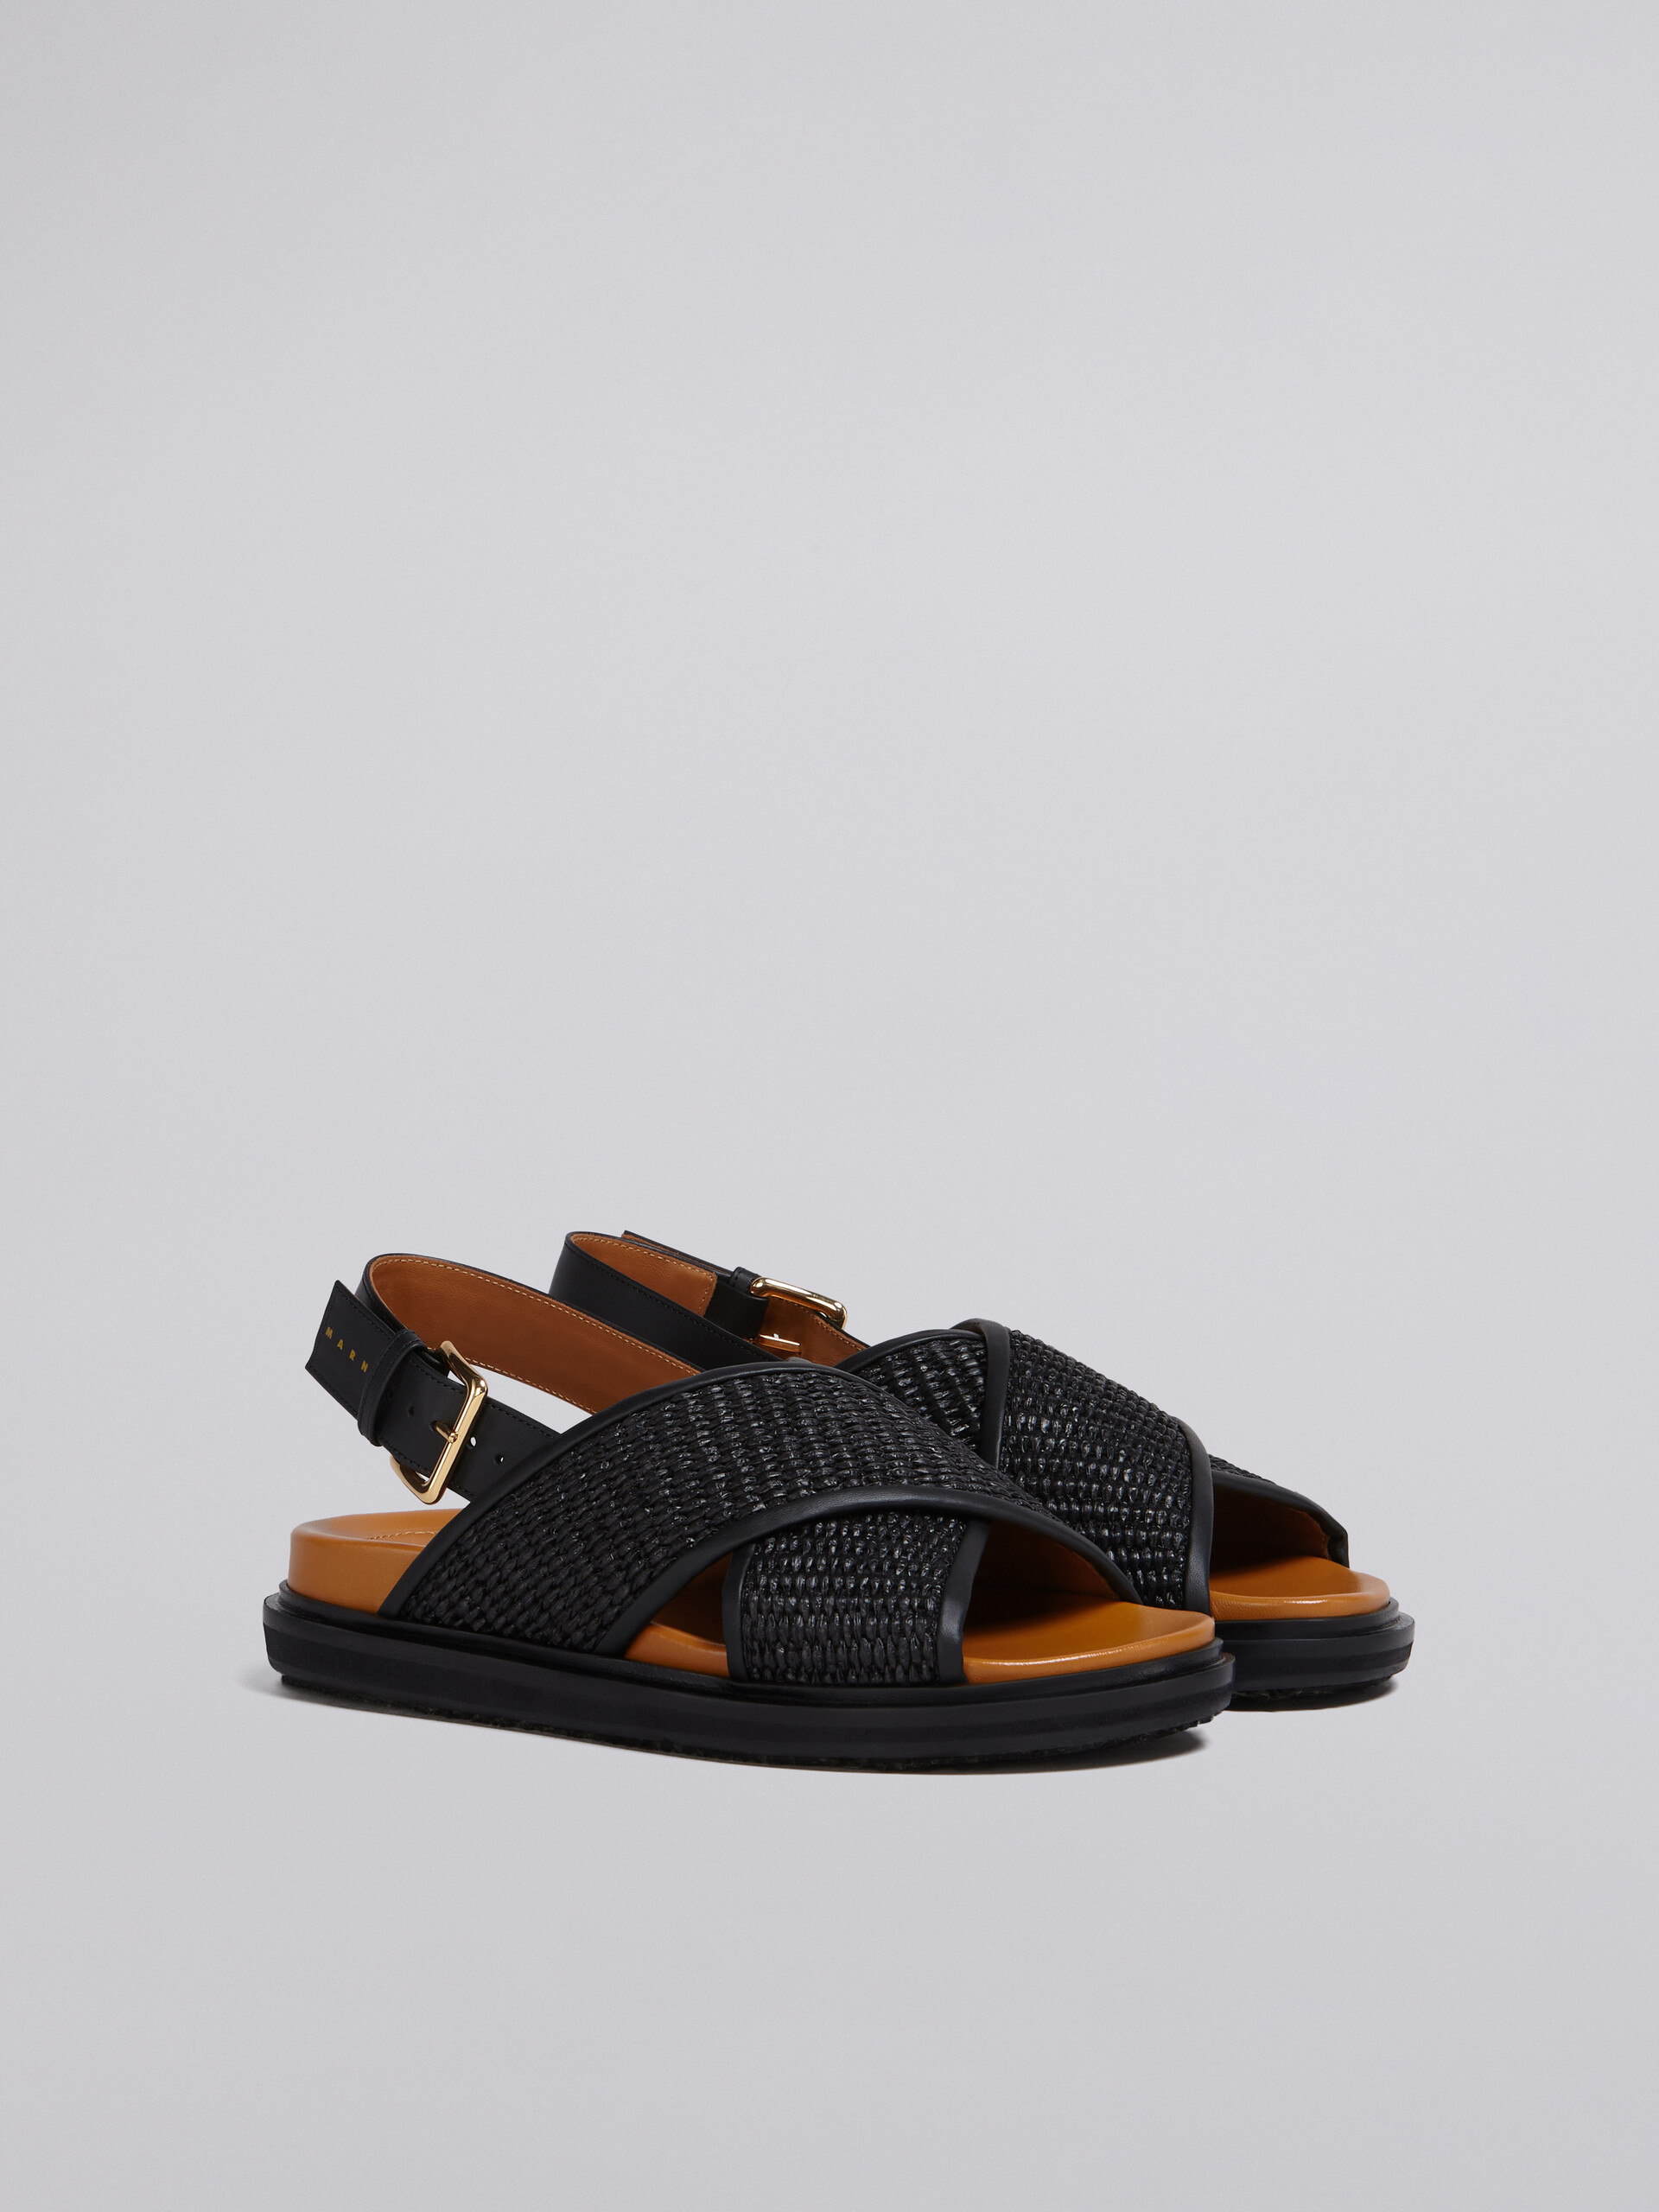 Fussbet sandals in brown leather and raffia-effect fabric - Sandals - Image 2